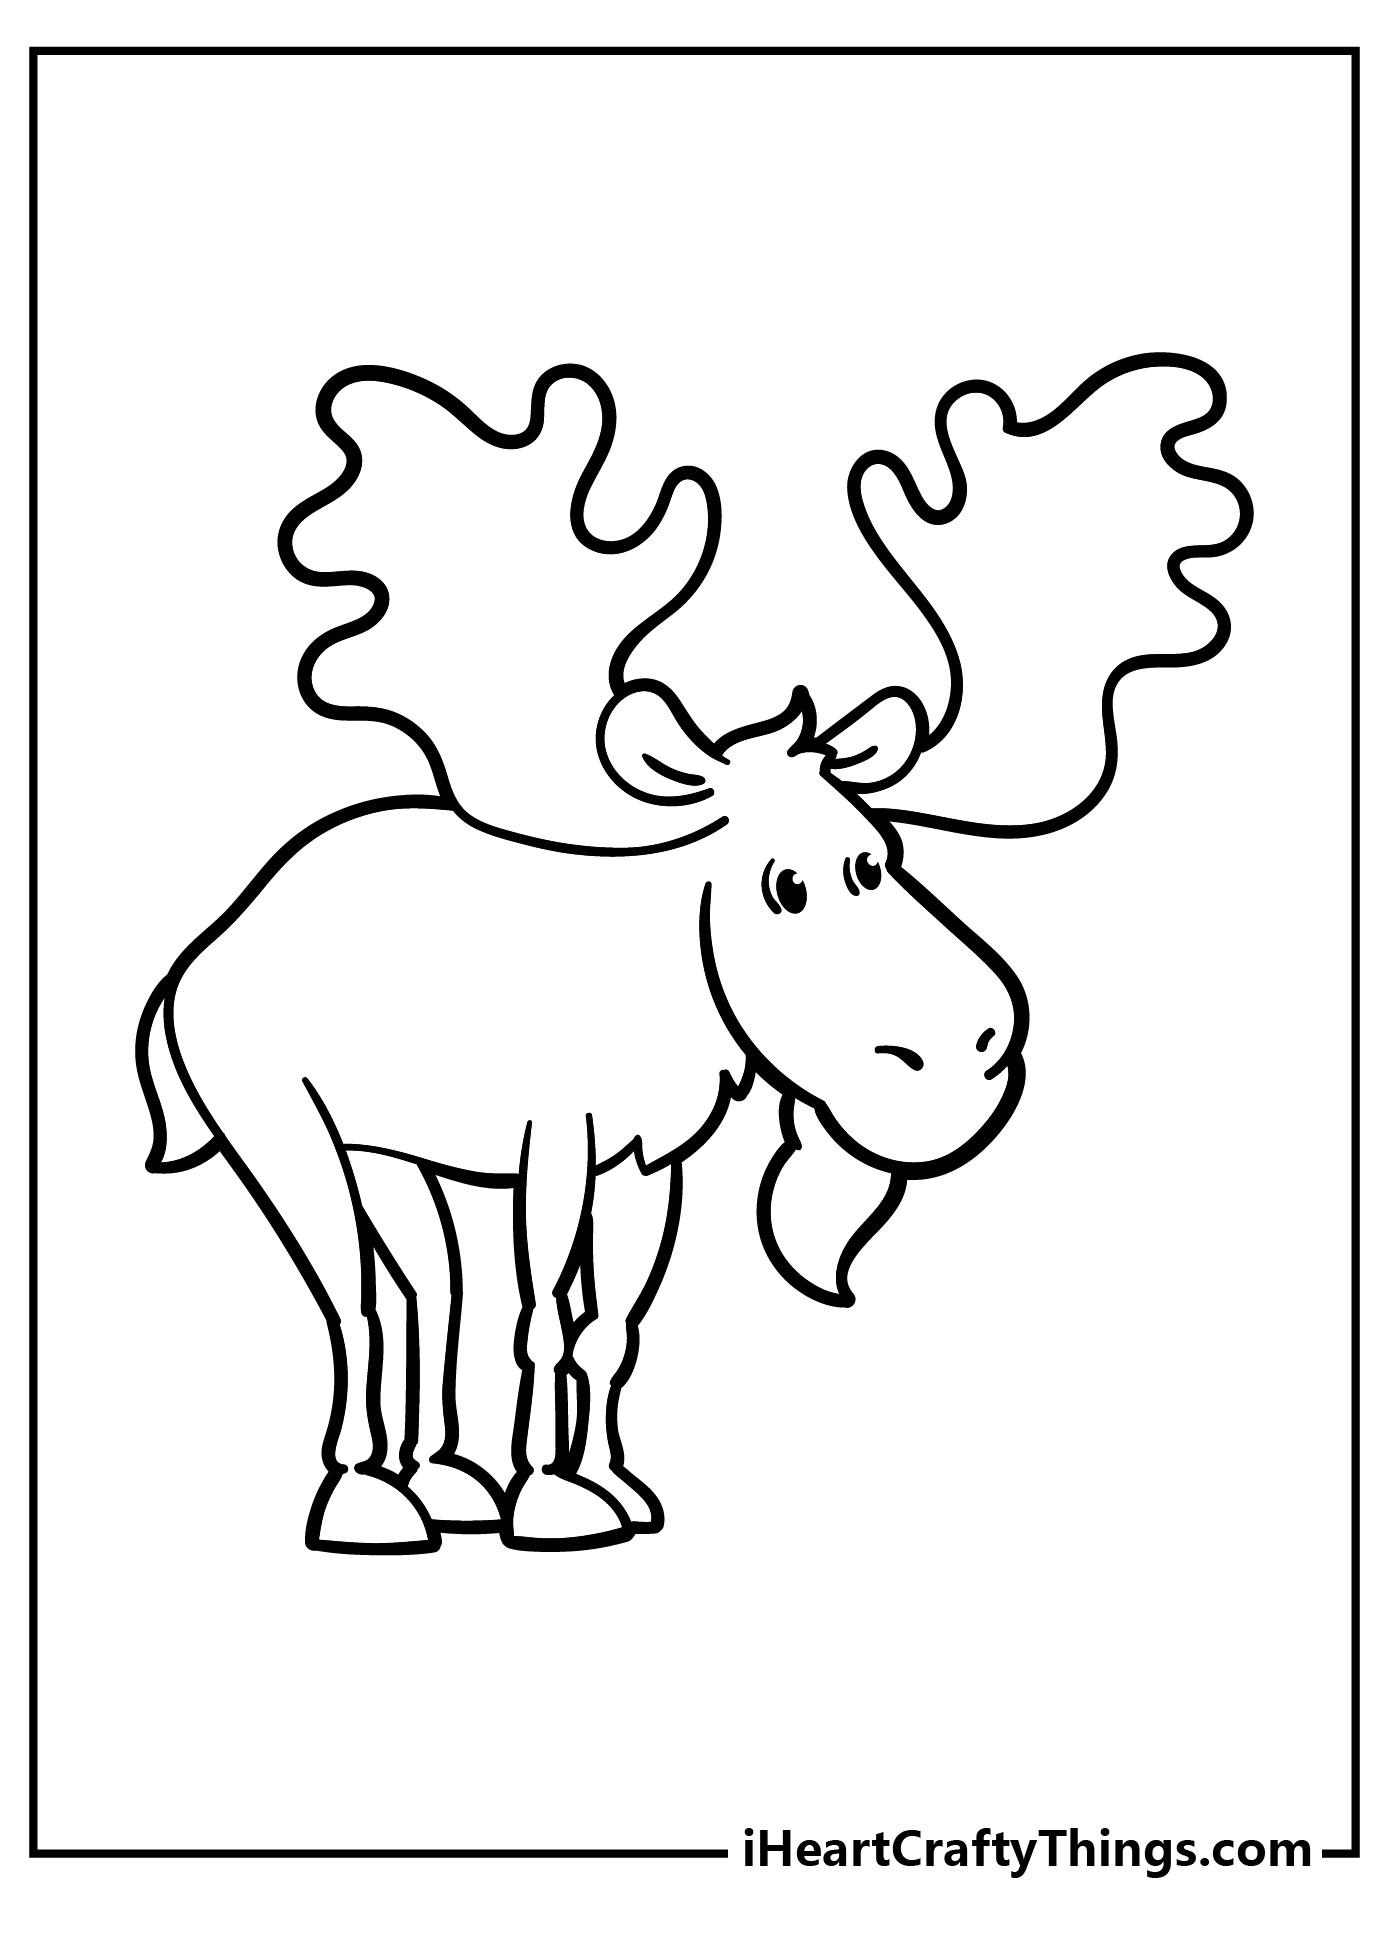 Printable Moose Coloring Pages Updated 20